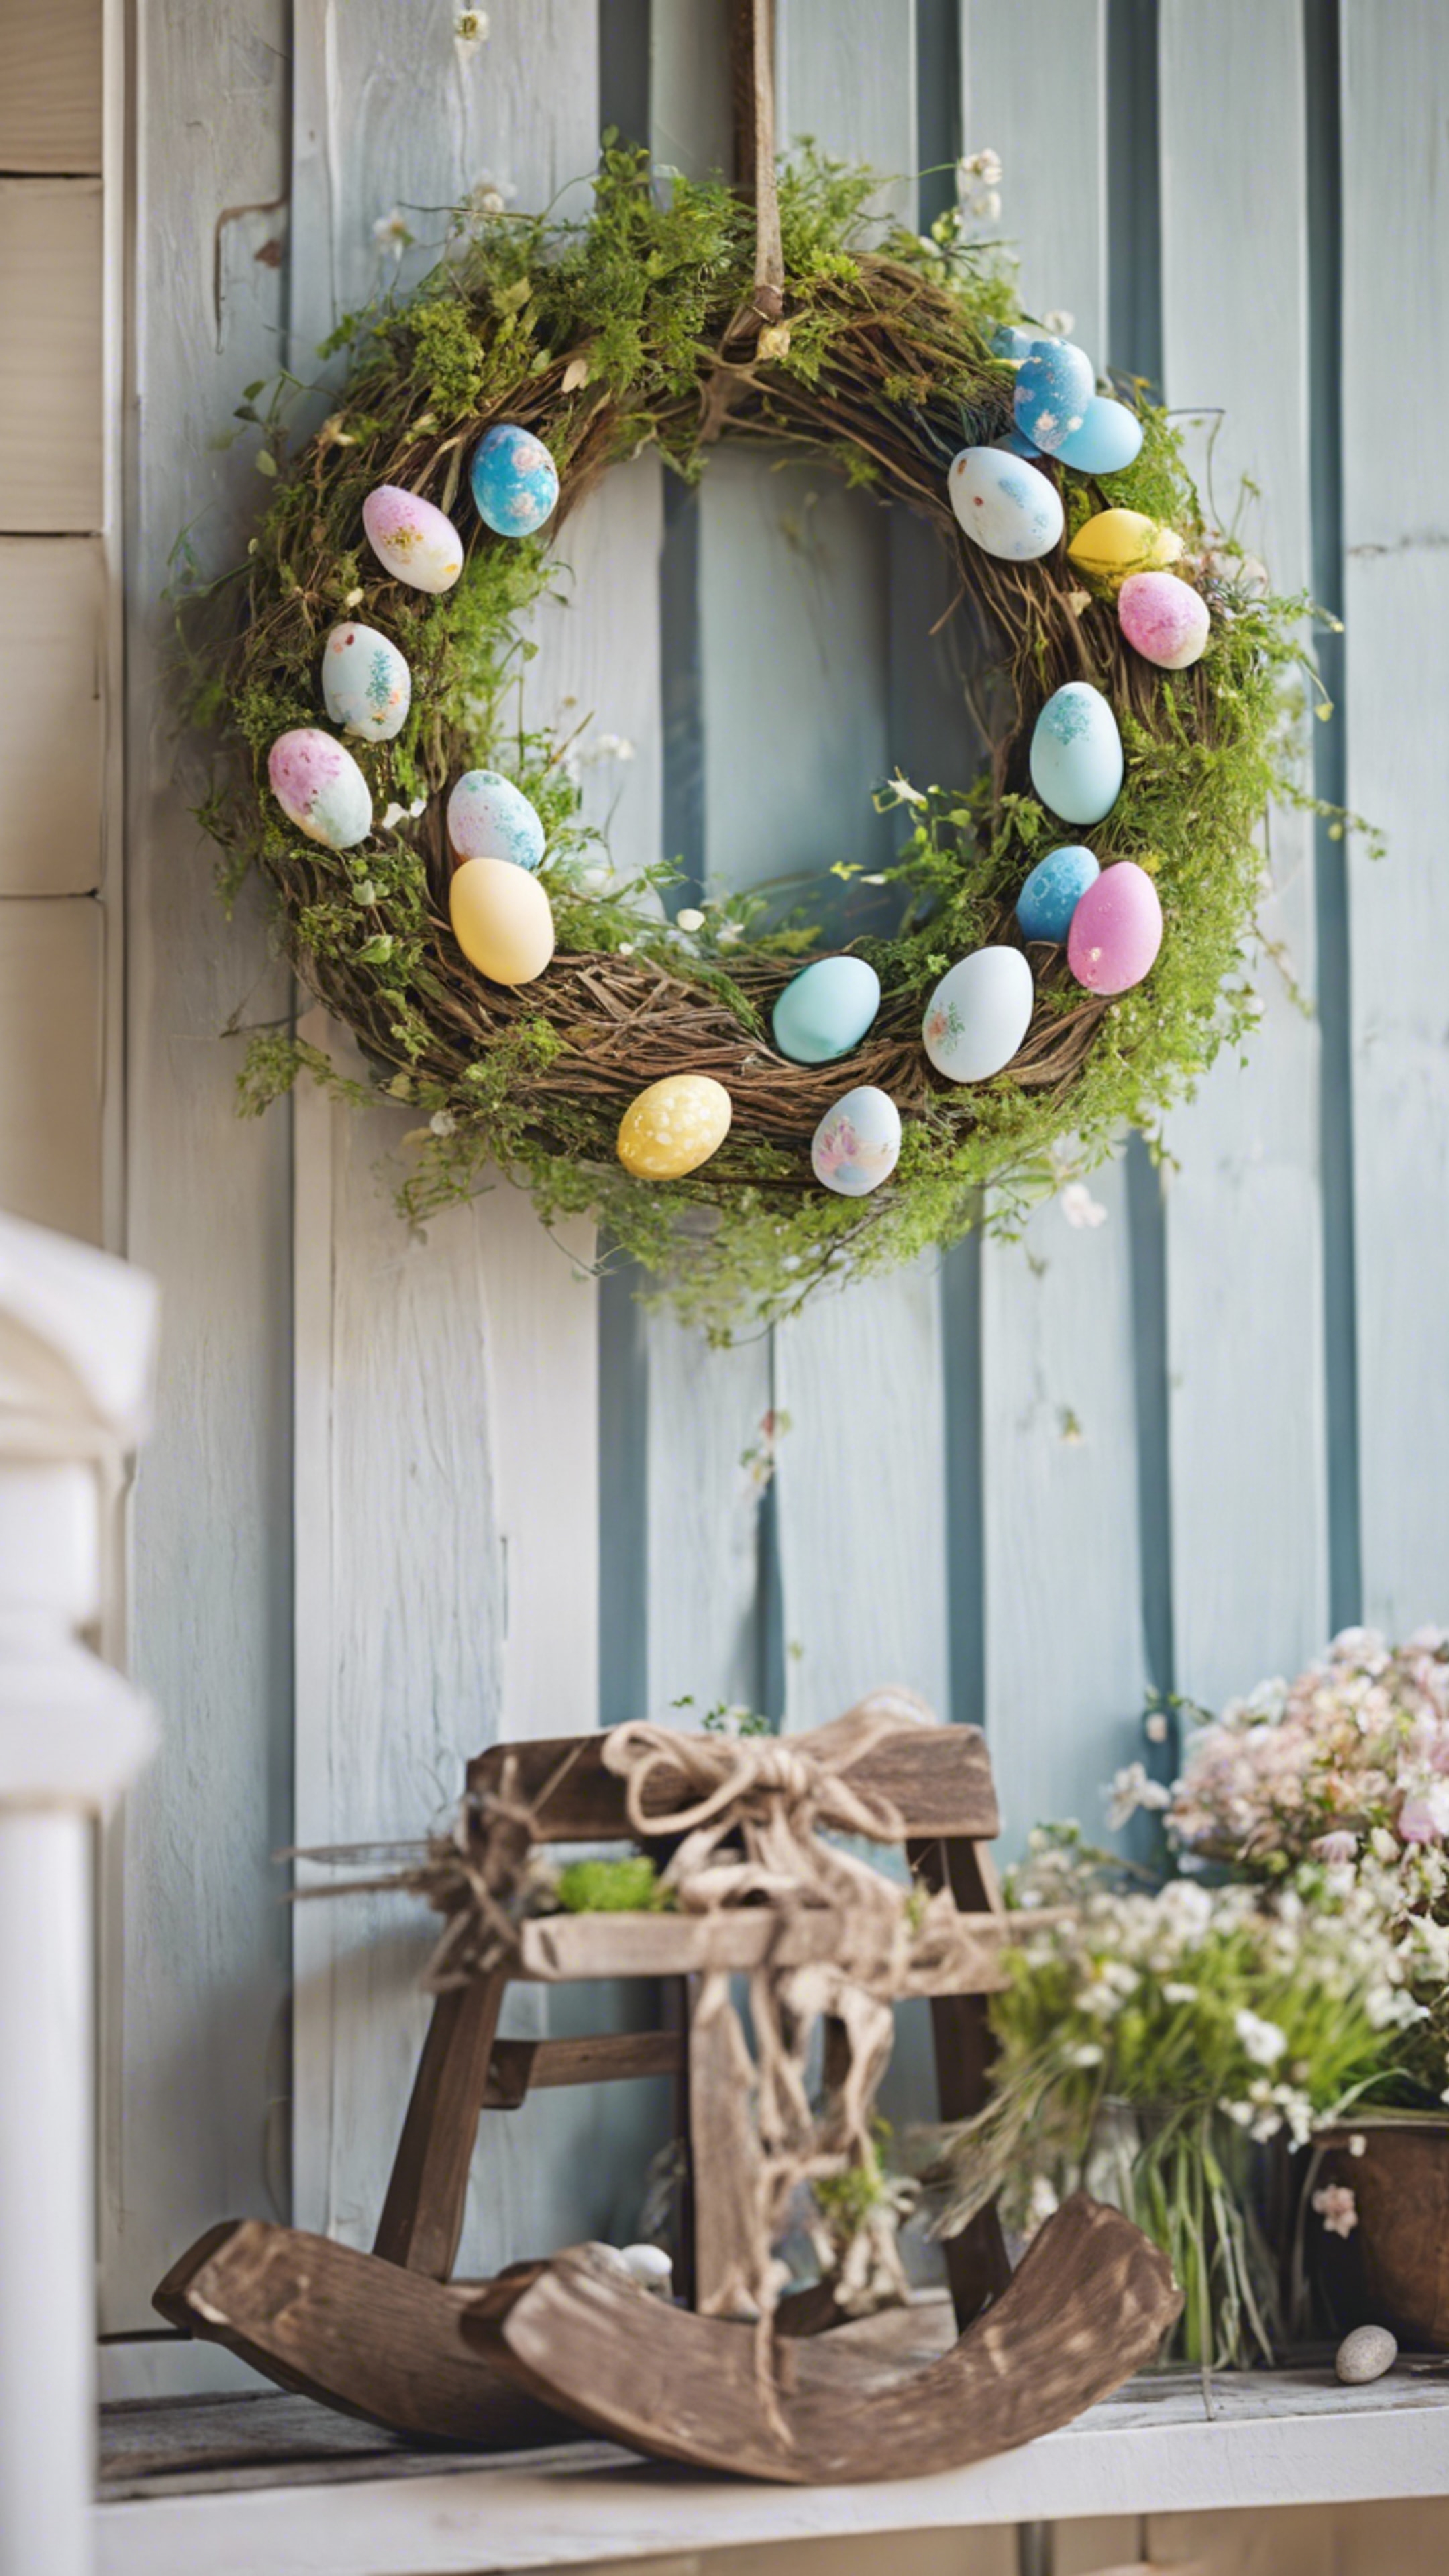 Country-style Easter decorative wreath hanging on a front porch, inviting the spring spirits. Wallpaper[efa72fd9539f4de39955]